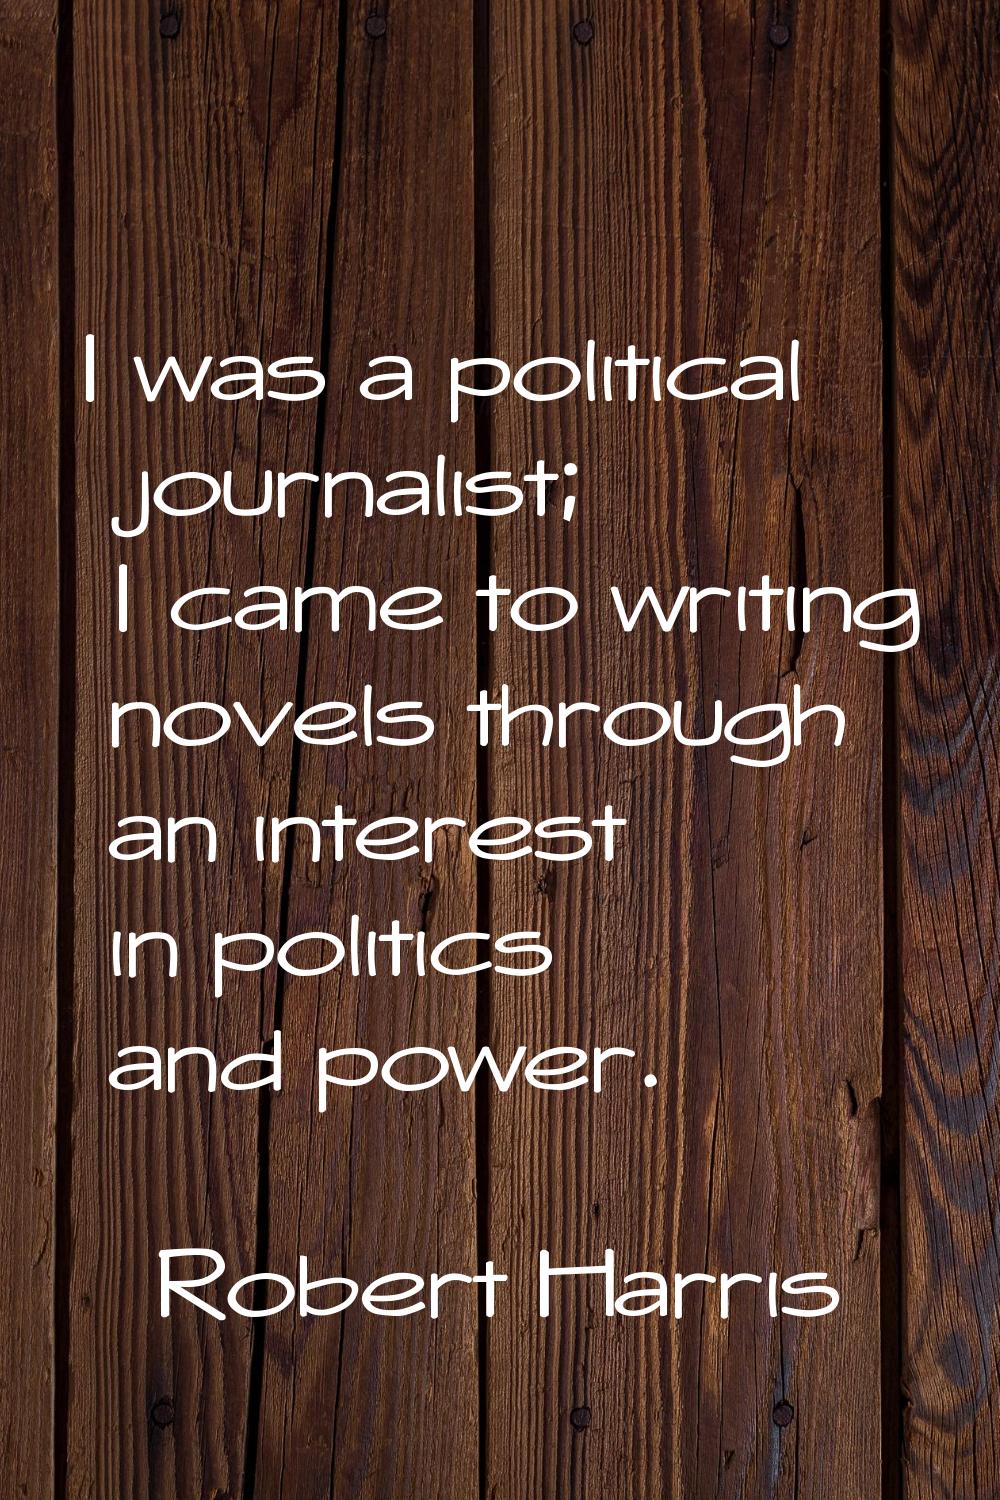 I was a political journalist; I came to writing novels through an interest in politics and power.